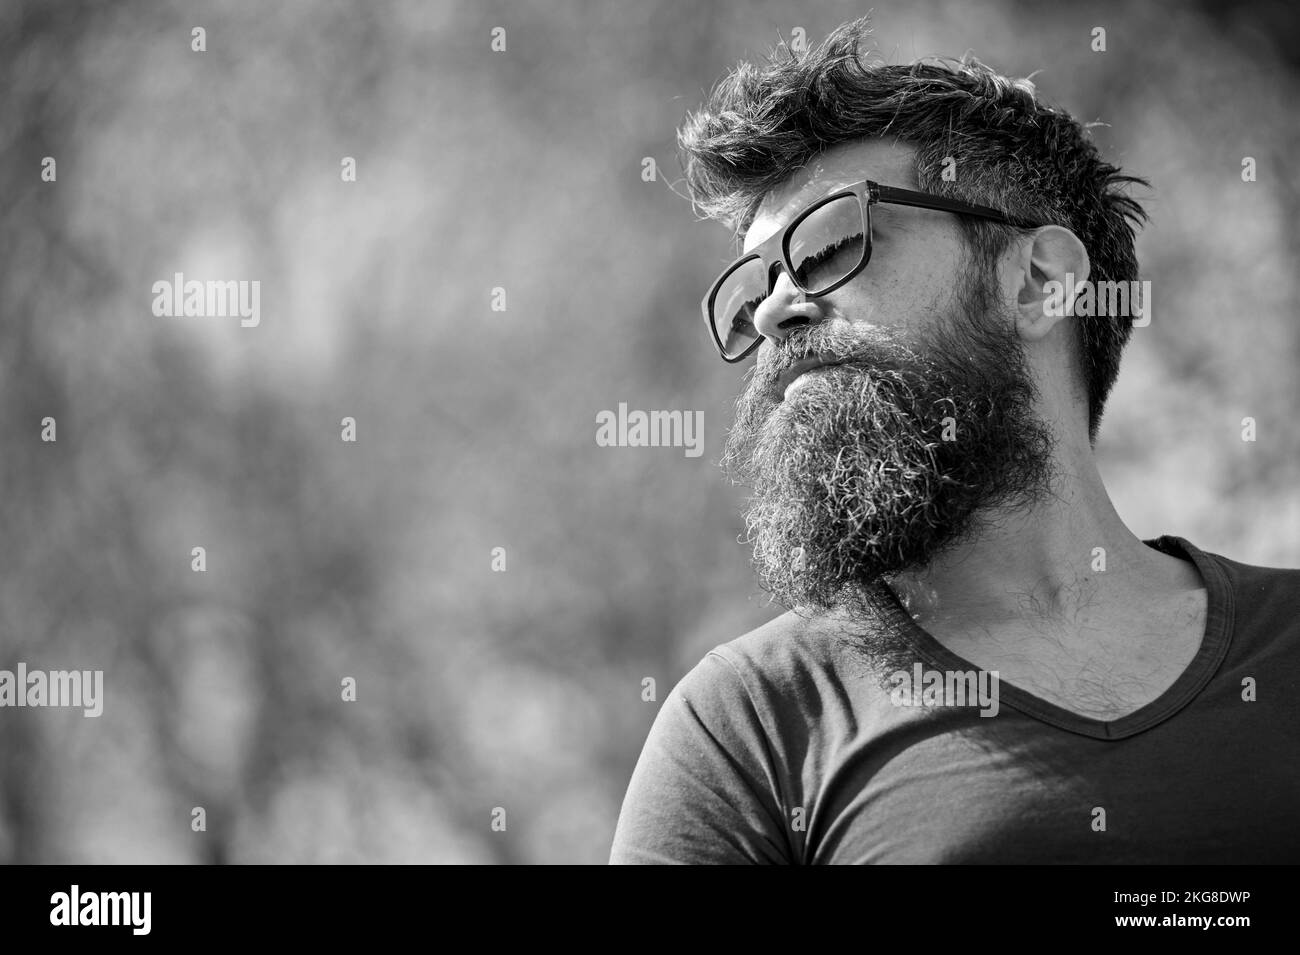 Guy with beard wears sunglasses. Hipster with beard and mustache on strict face, nature background, defocused. Man with beard looks stylish and Stock Photo